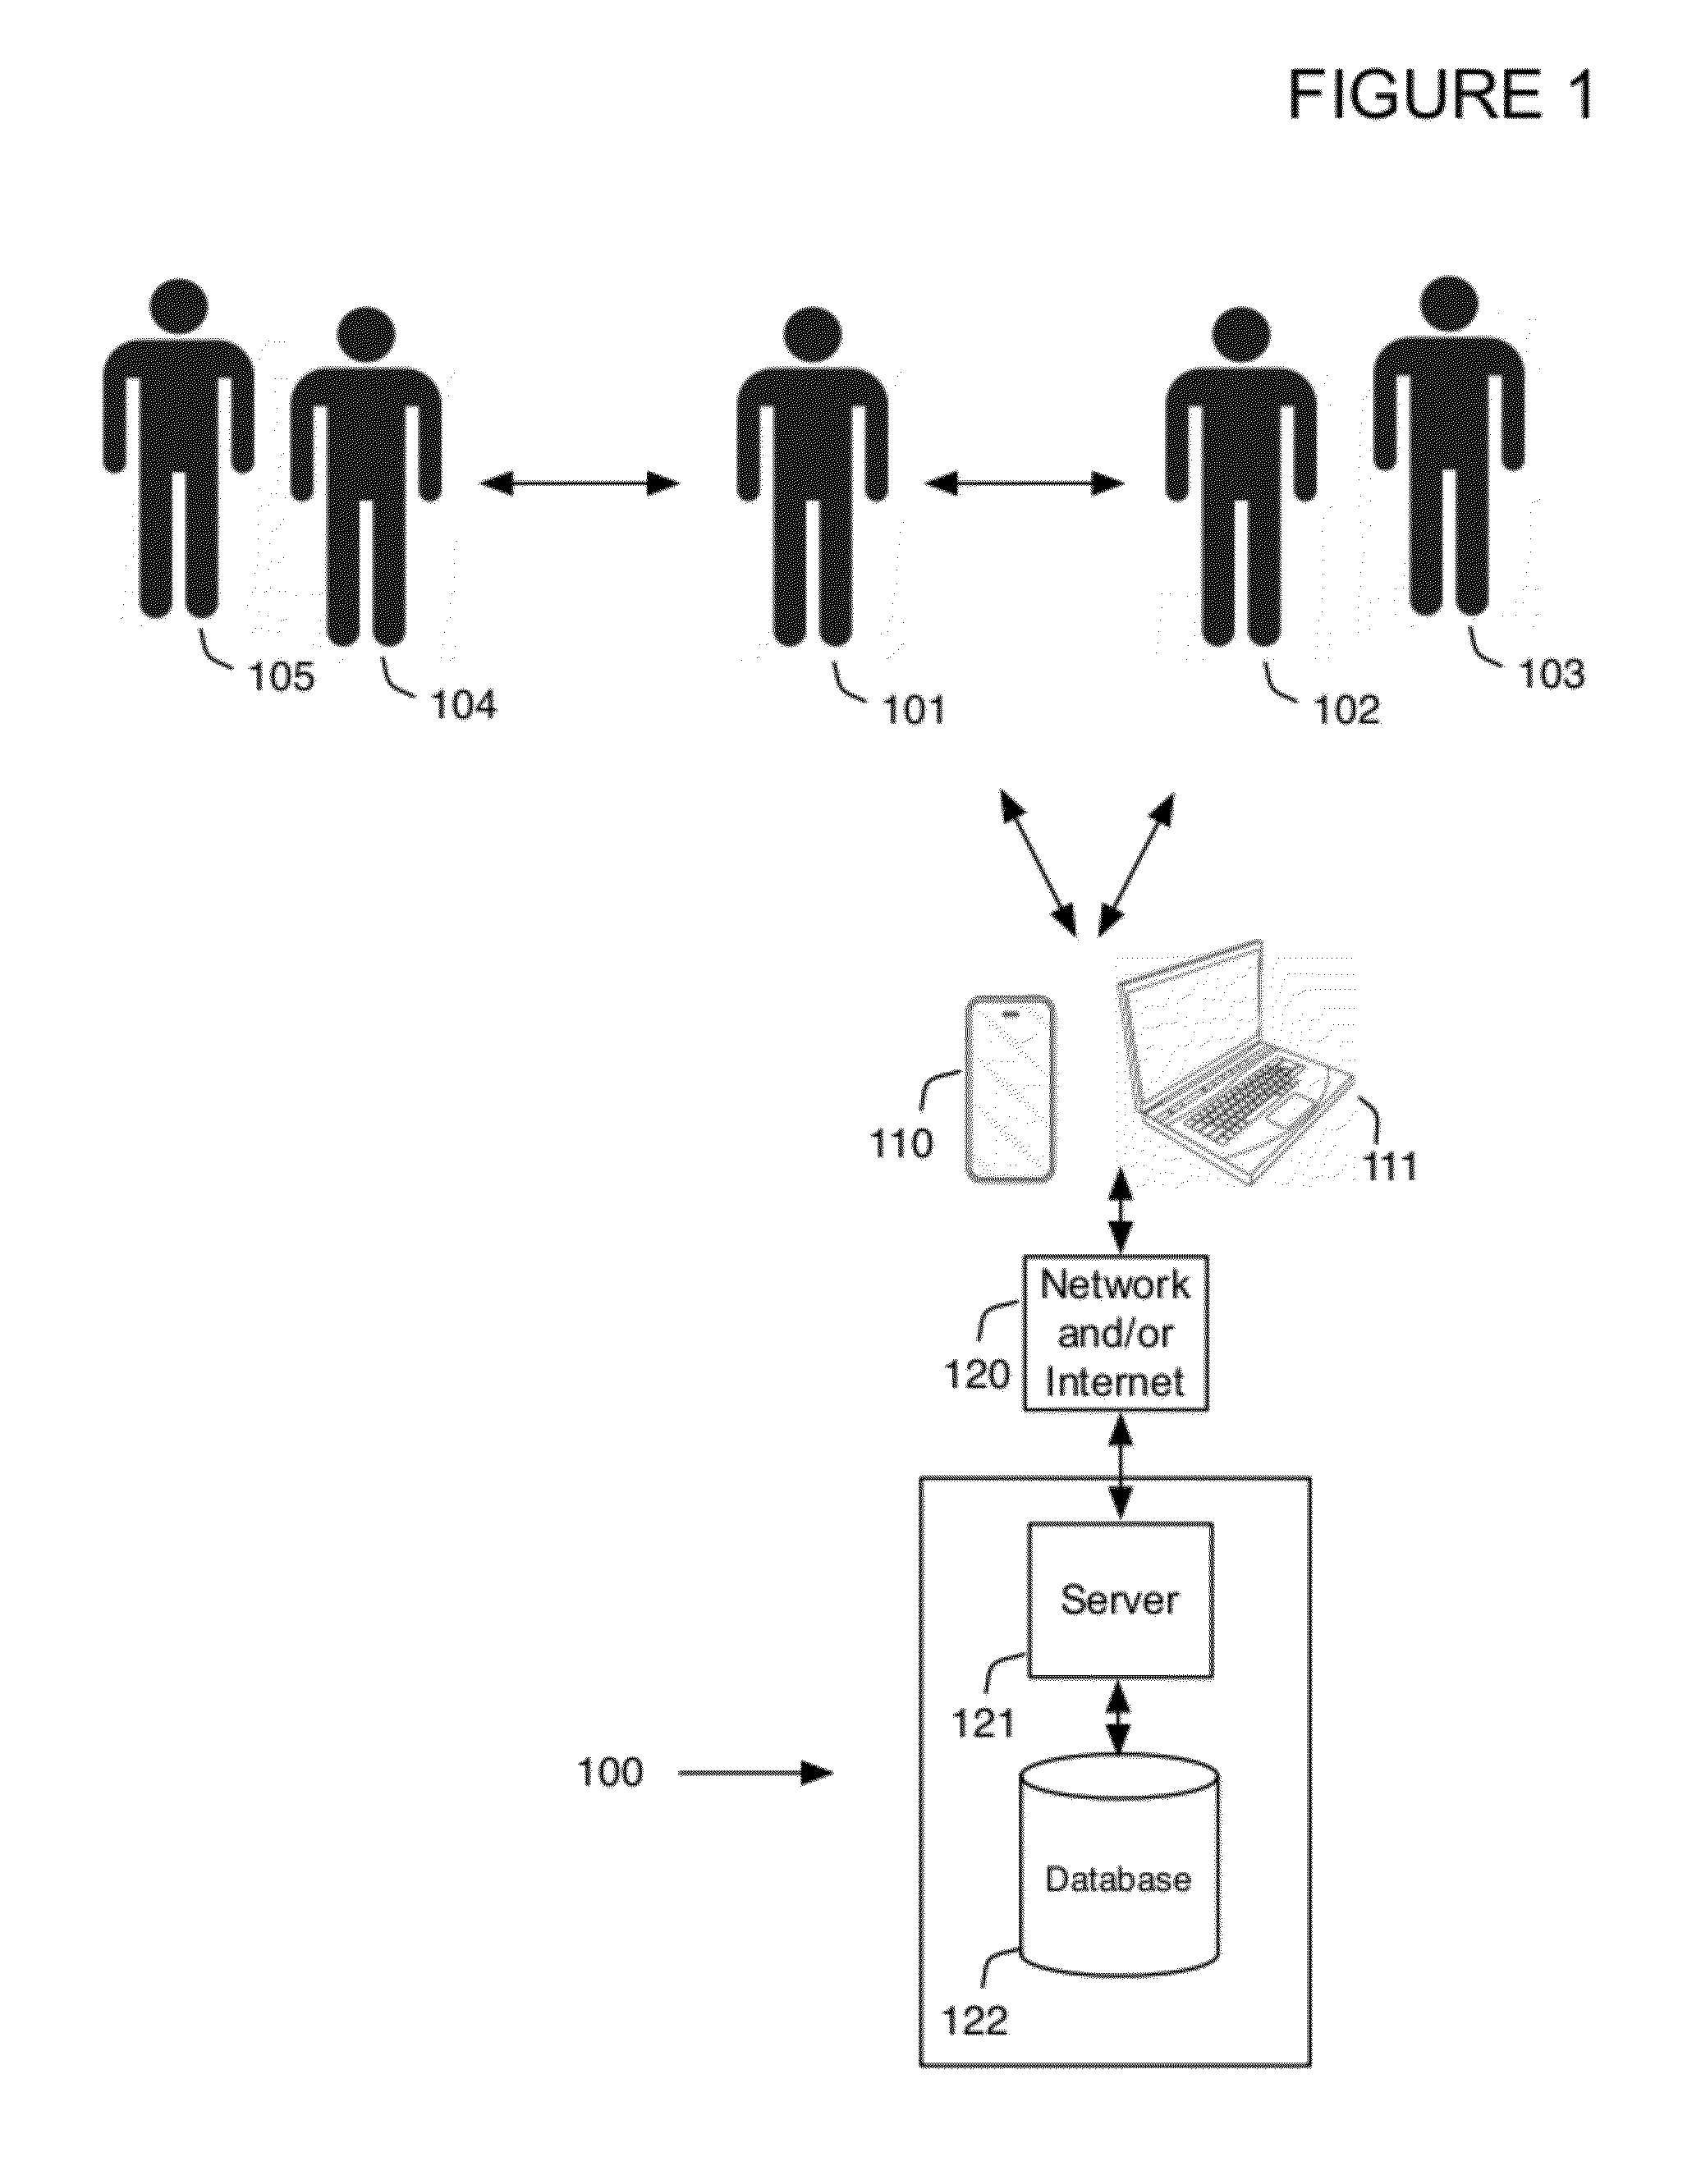 Enhanced search system and method based on entity ranking